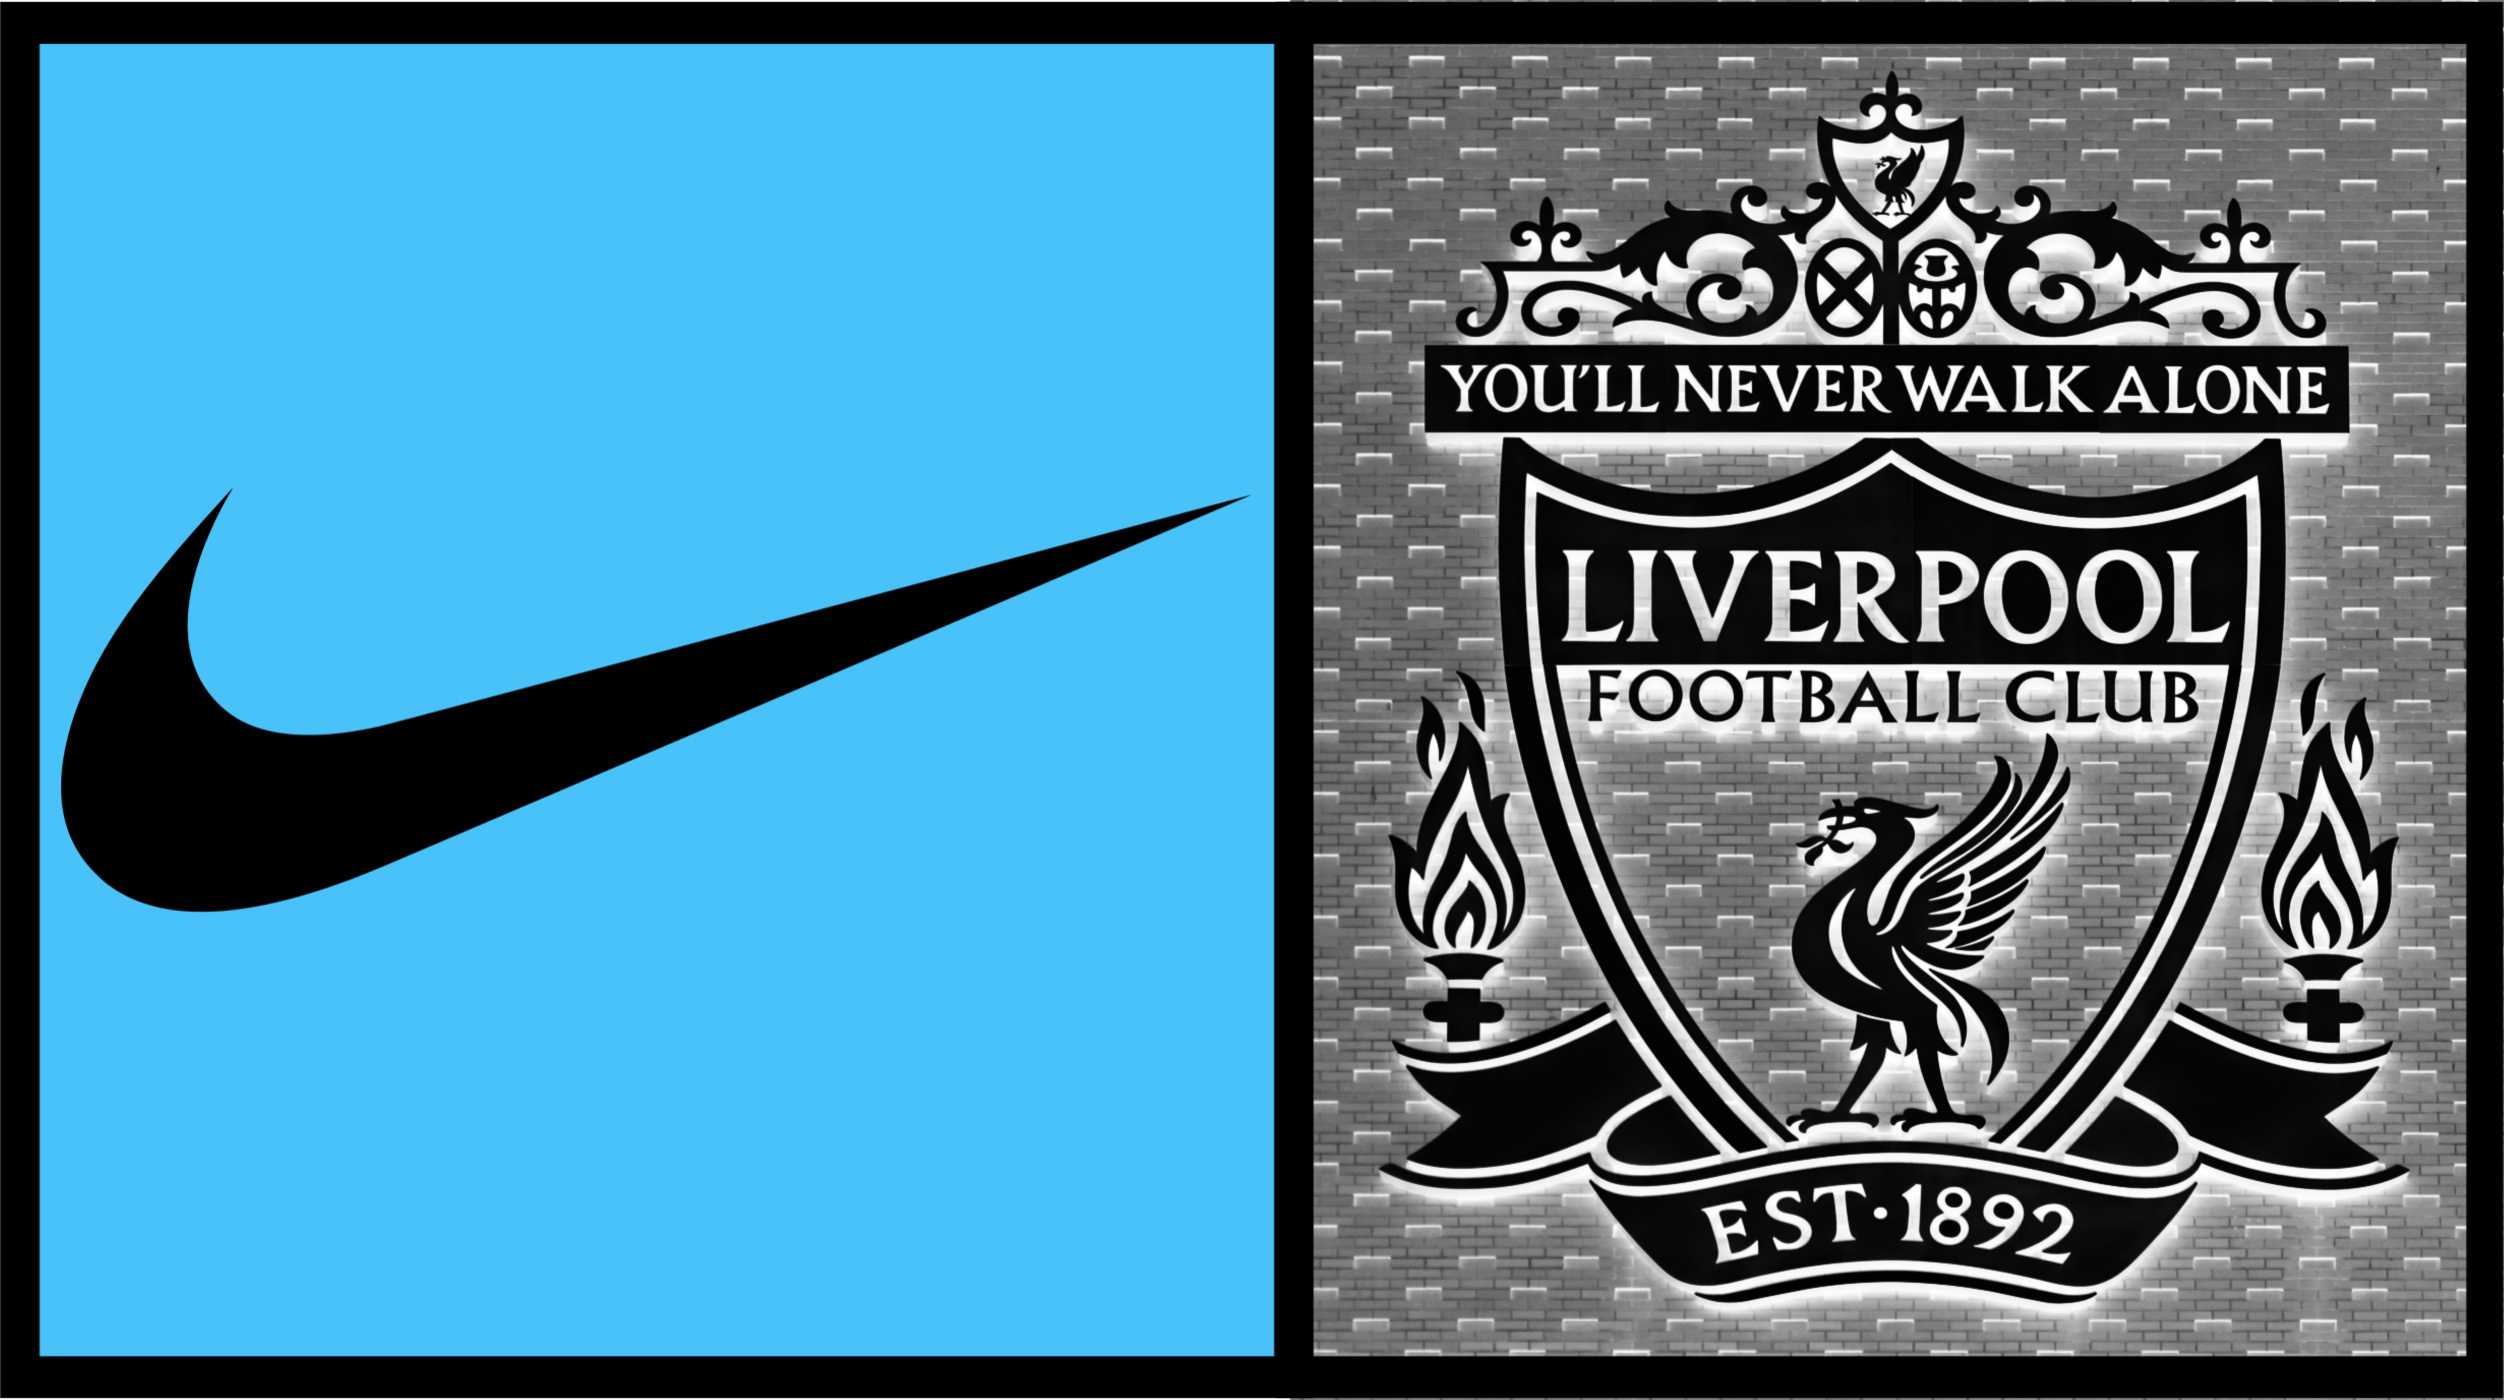 Photo – Fresh new leaks of Liverpool’s adventurous looking away kit for 20/21 drops online